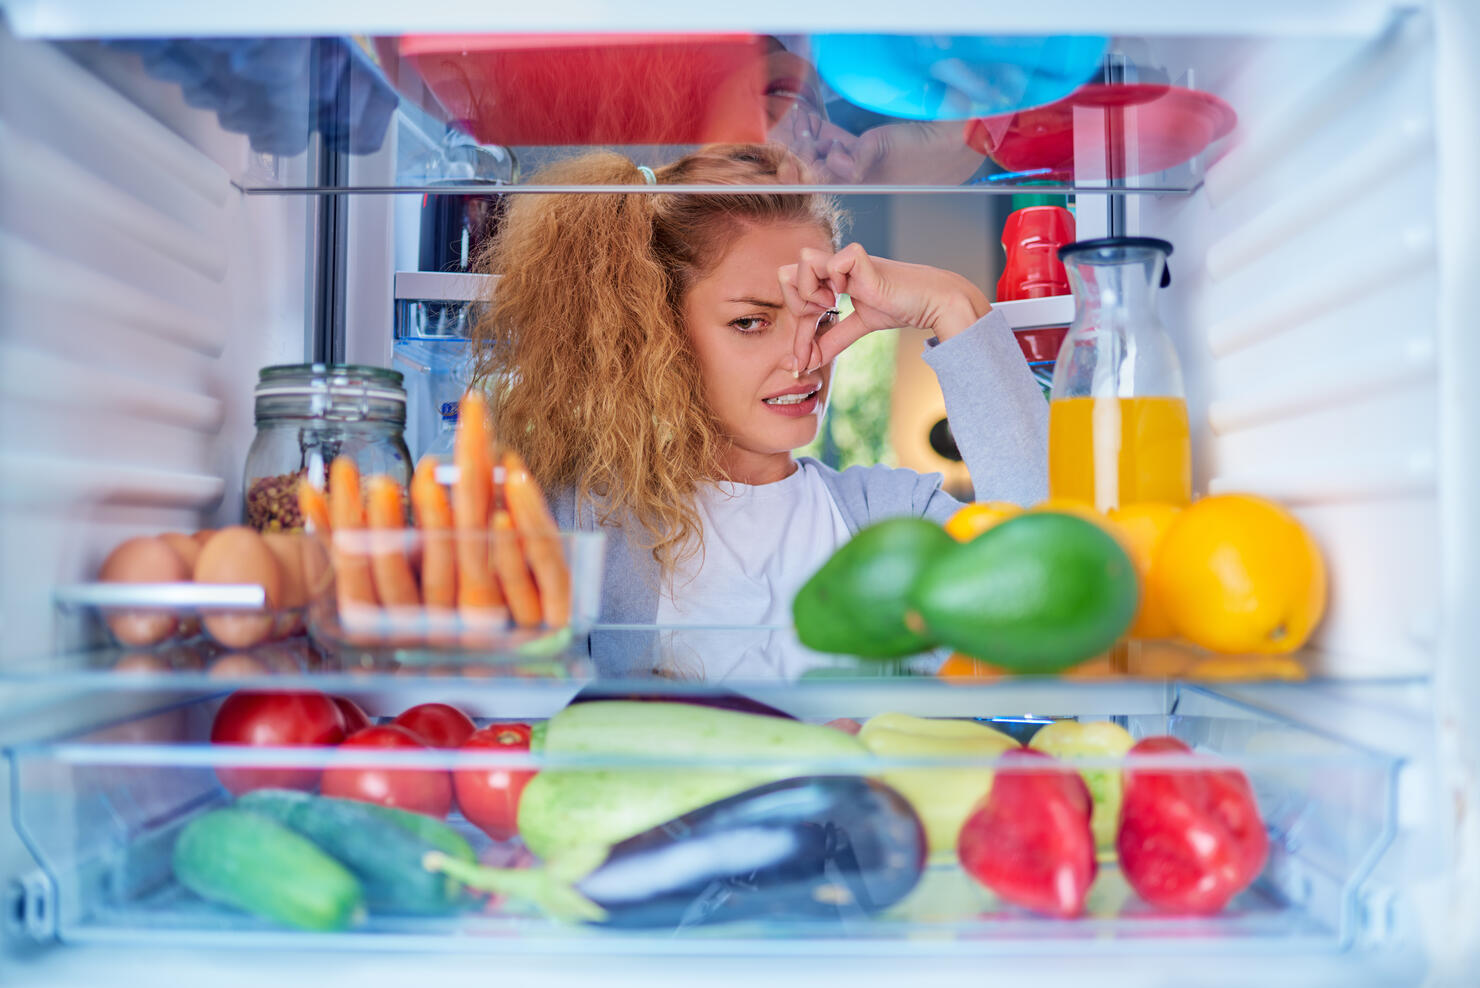 Woman standing in front of opened fridge and holding up to her nose.